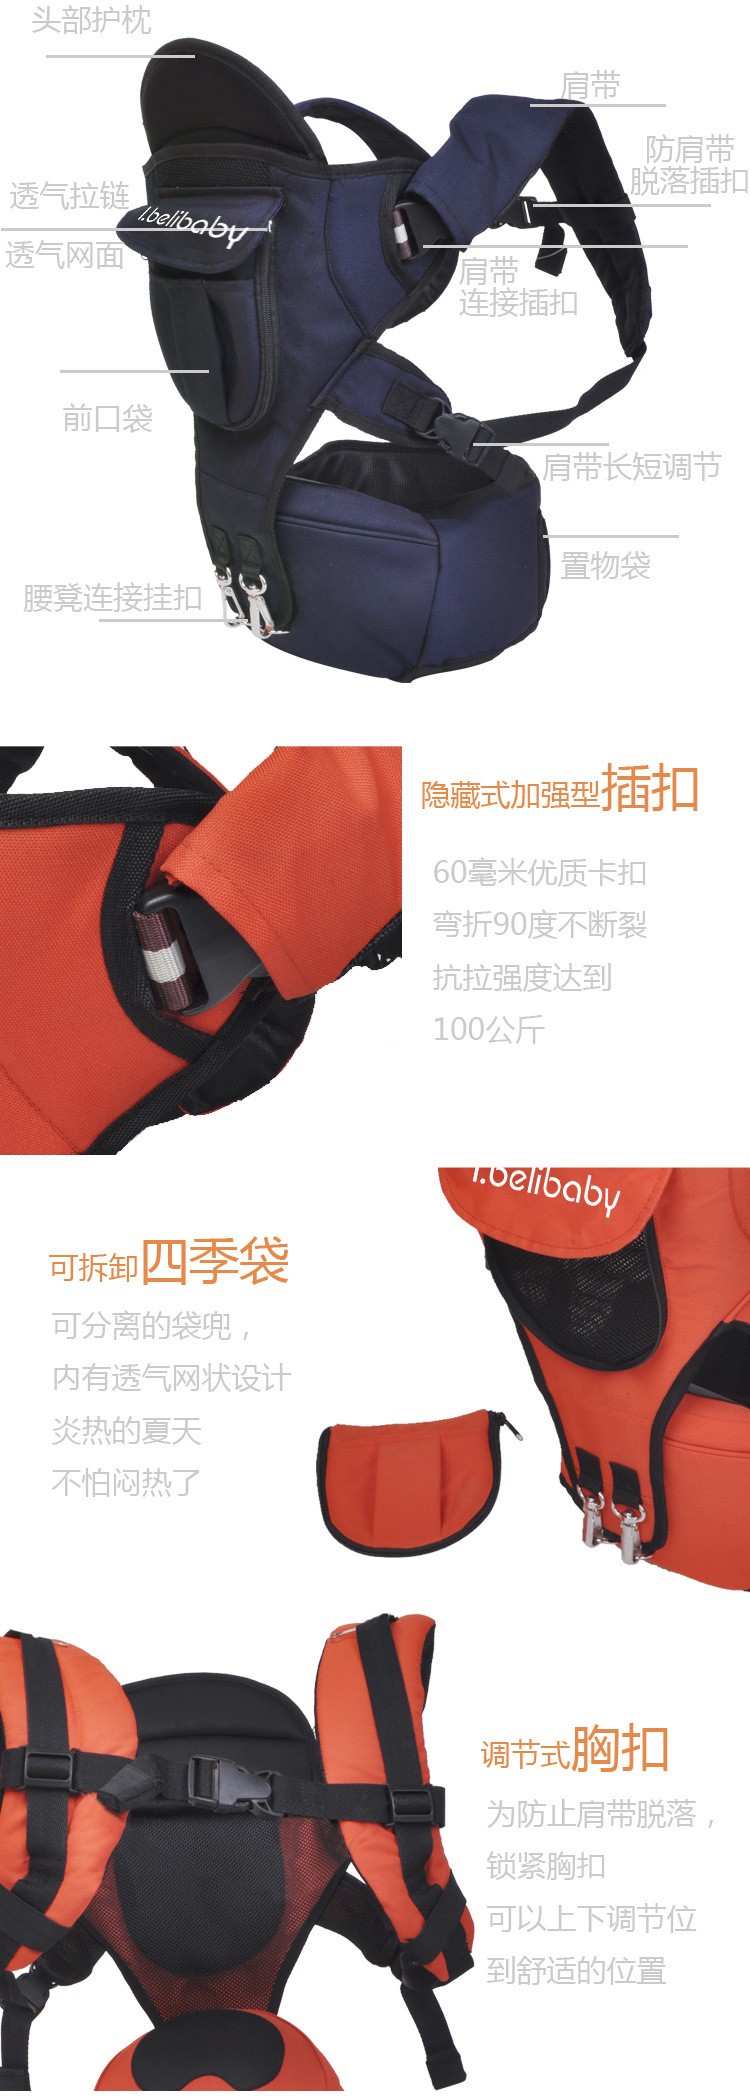 Baby Carrier (11)